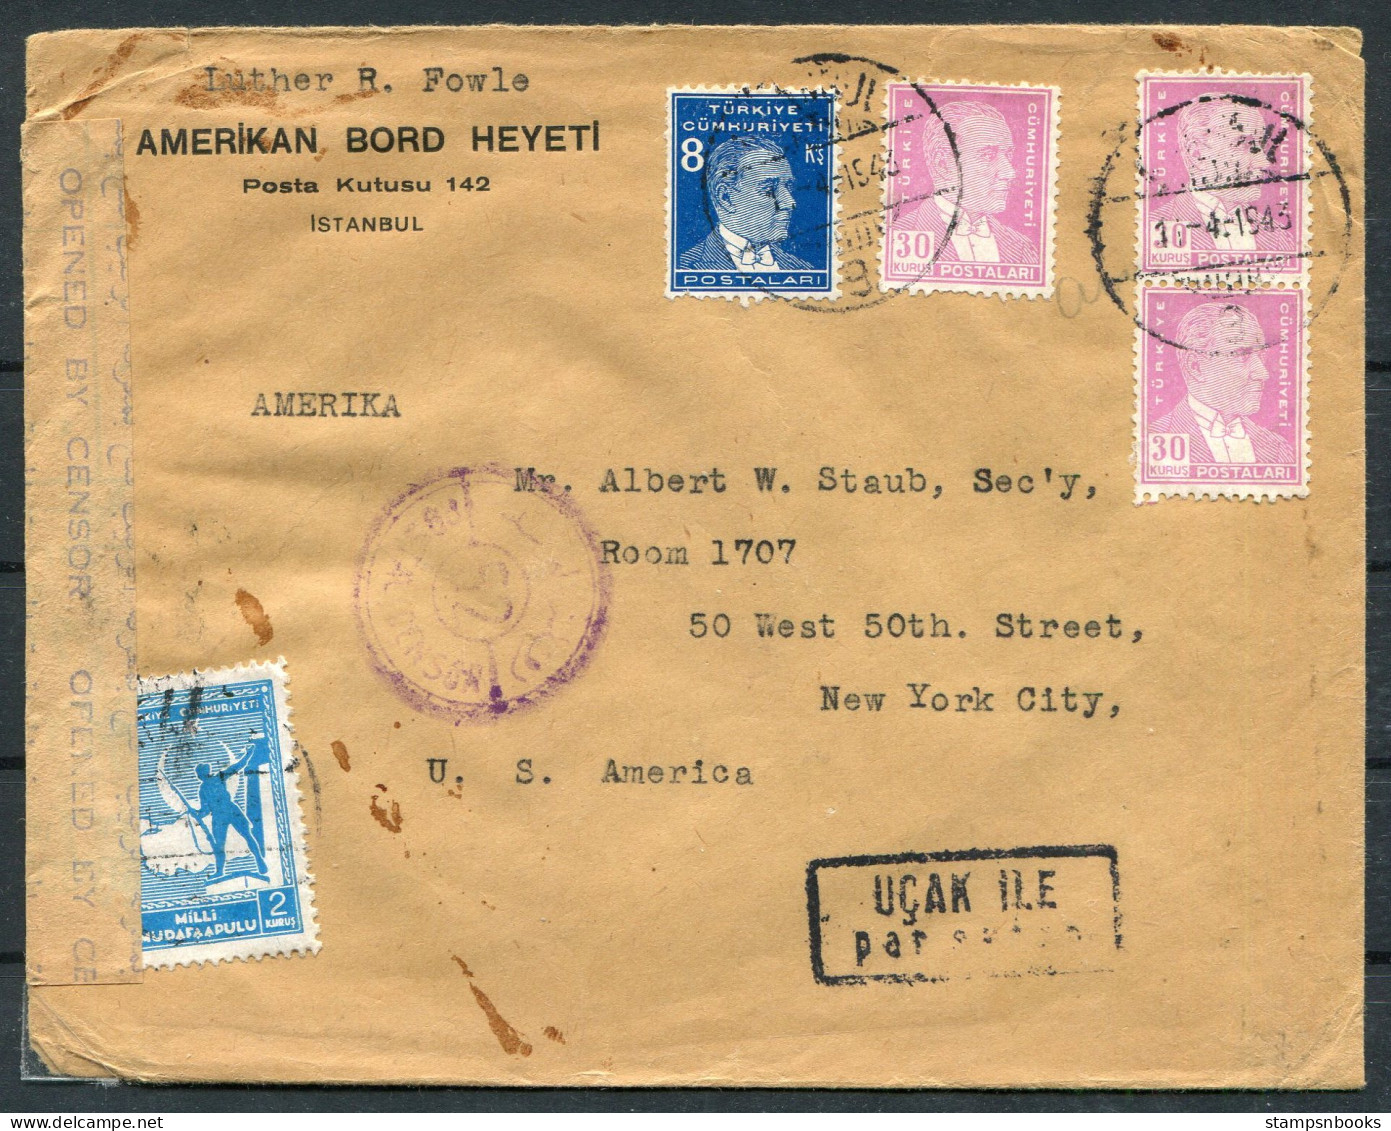 1943 Turkey Airmail Cover, Luther R Fowle, Amerikan Bord Heyeti Istanbul Mission Censor Cover - New York, USA - Covers & Documents